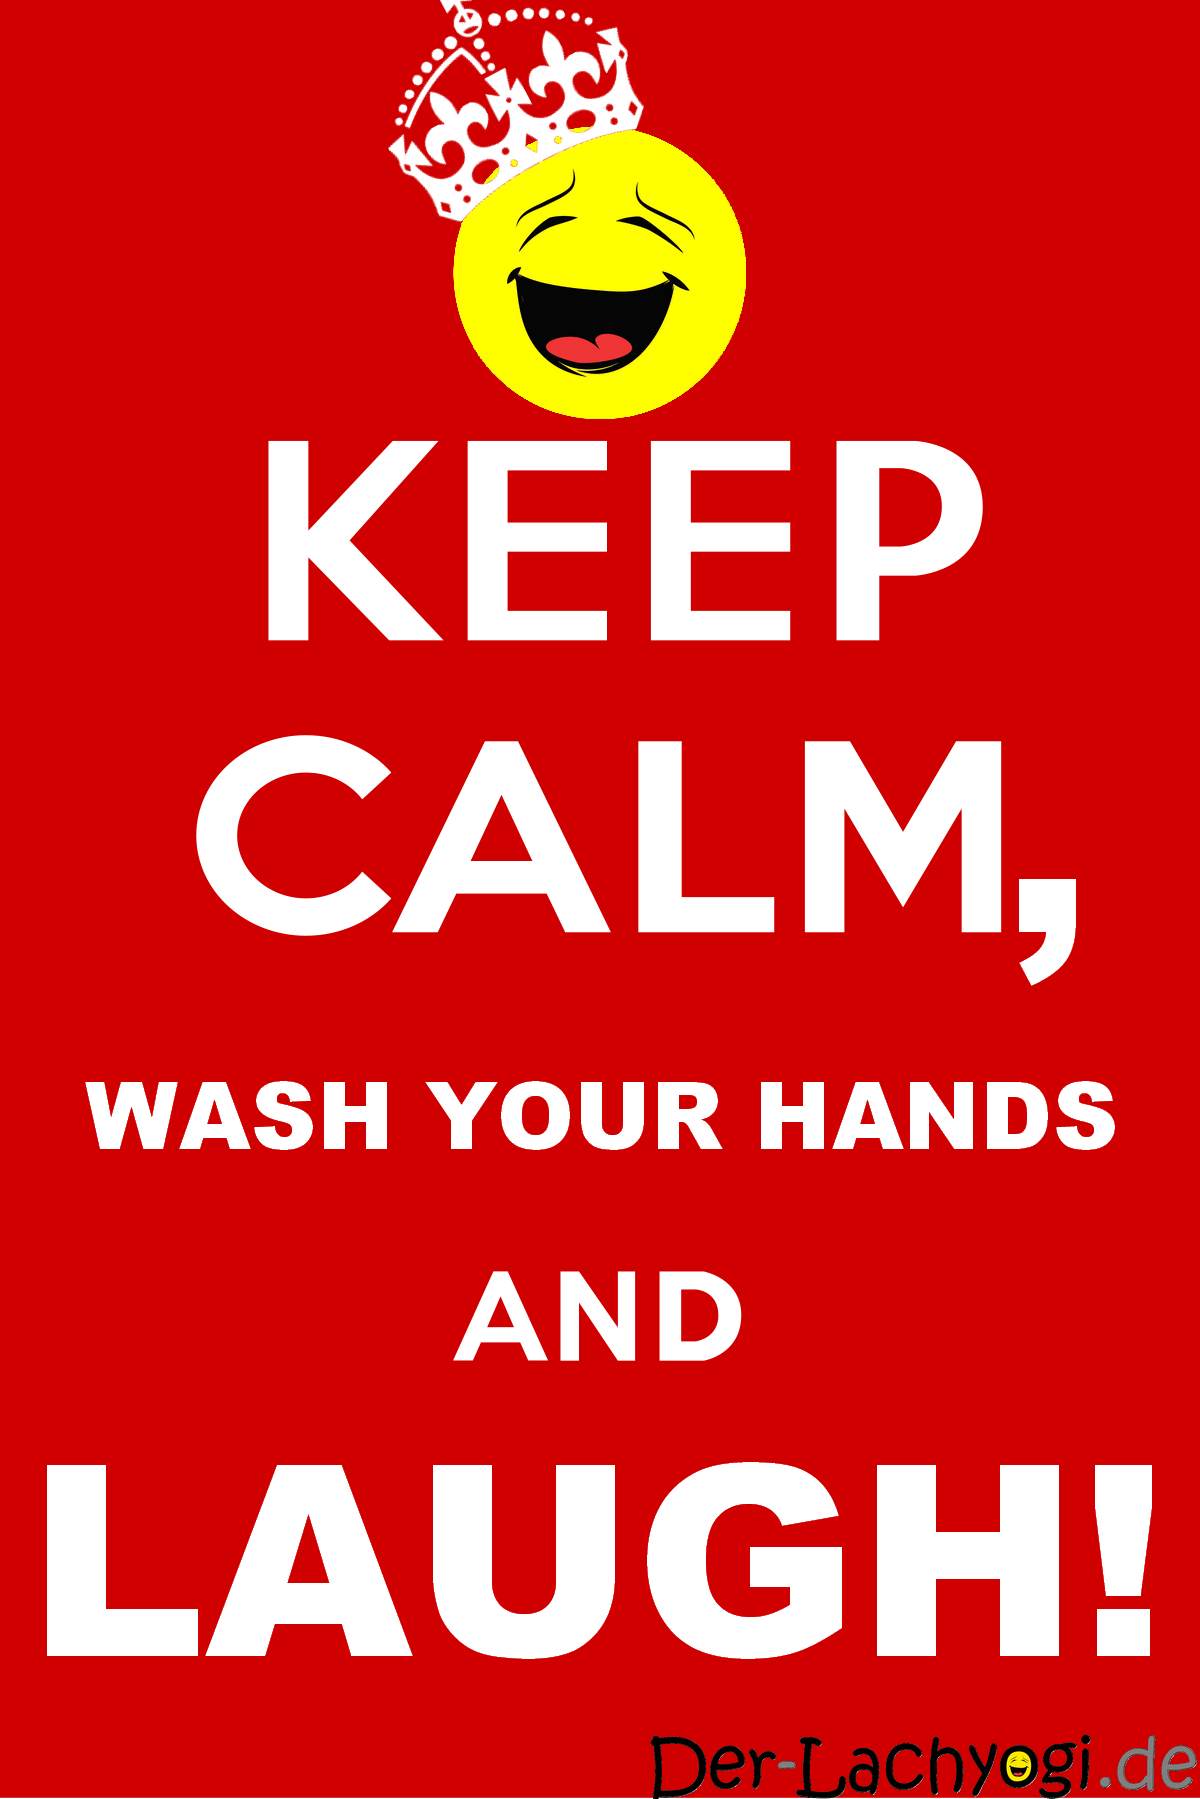 Keep calm, wash your hand and laugh!